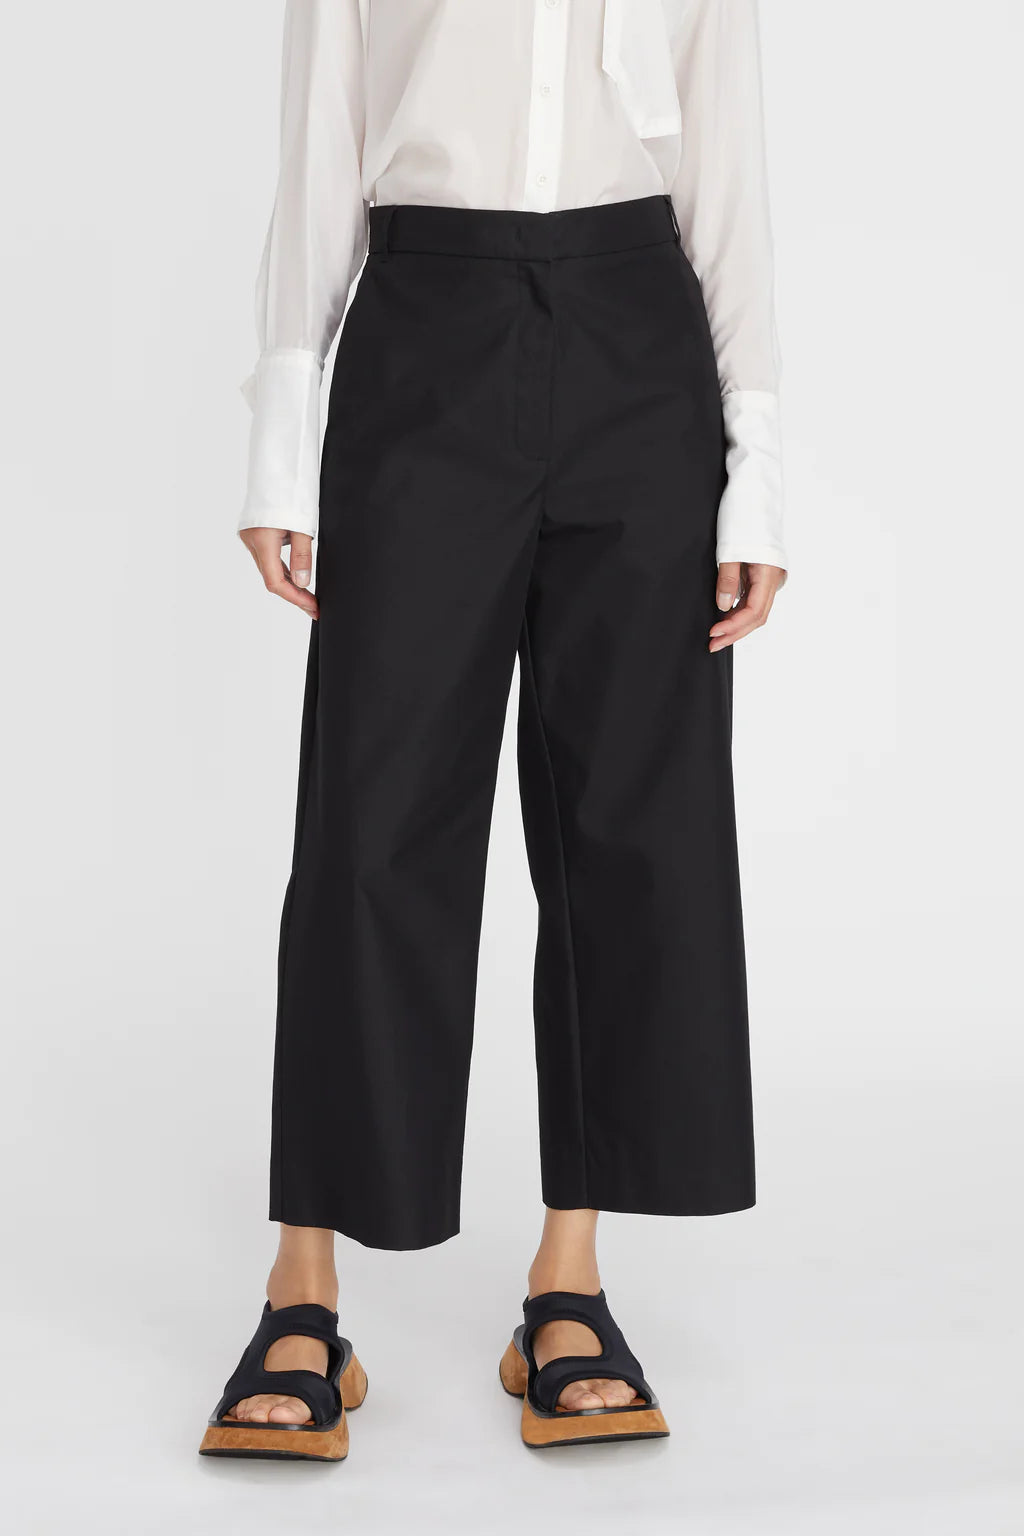 Lee Jeans high rise cropped wide leg jeans in black  ASOS